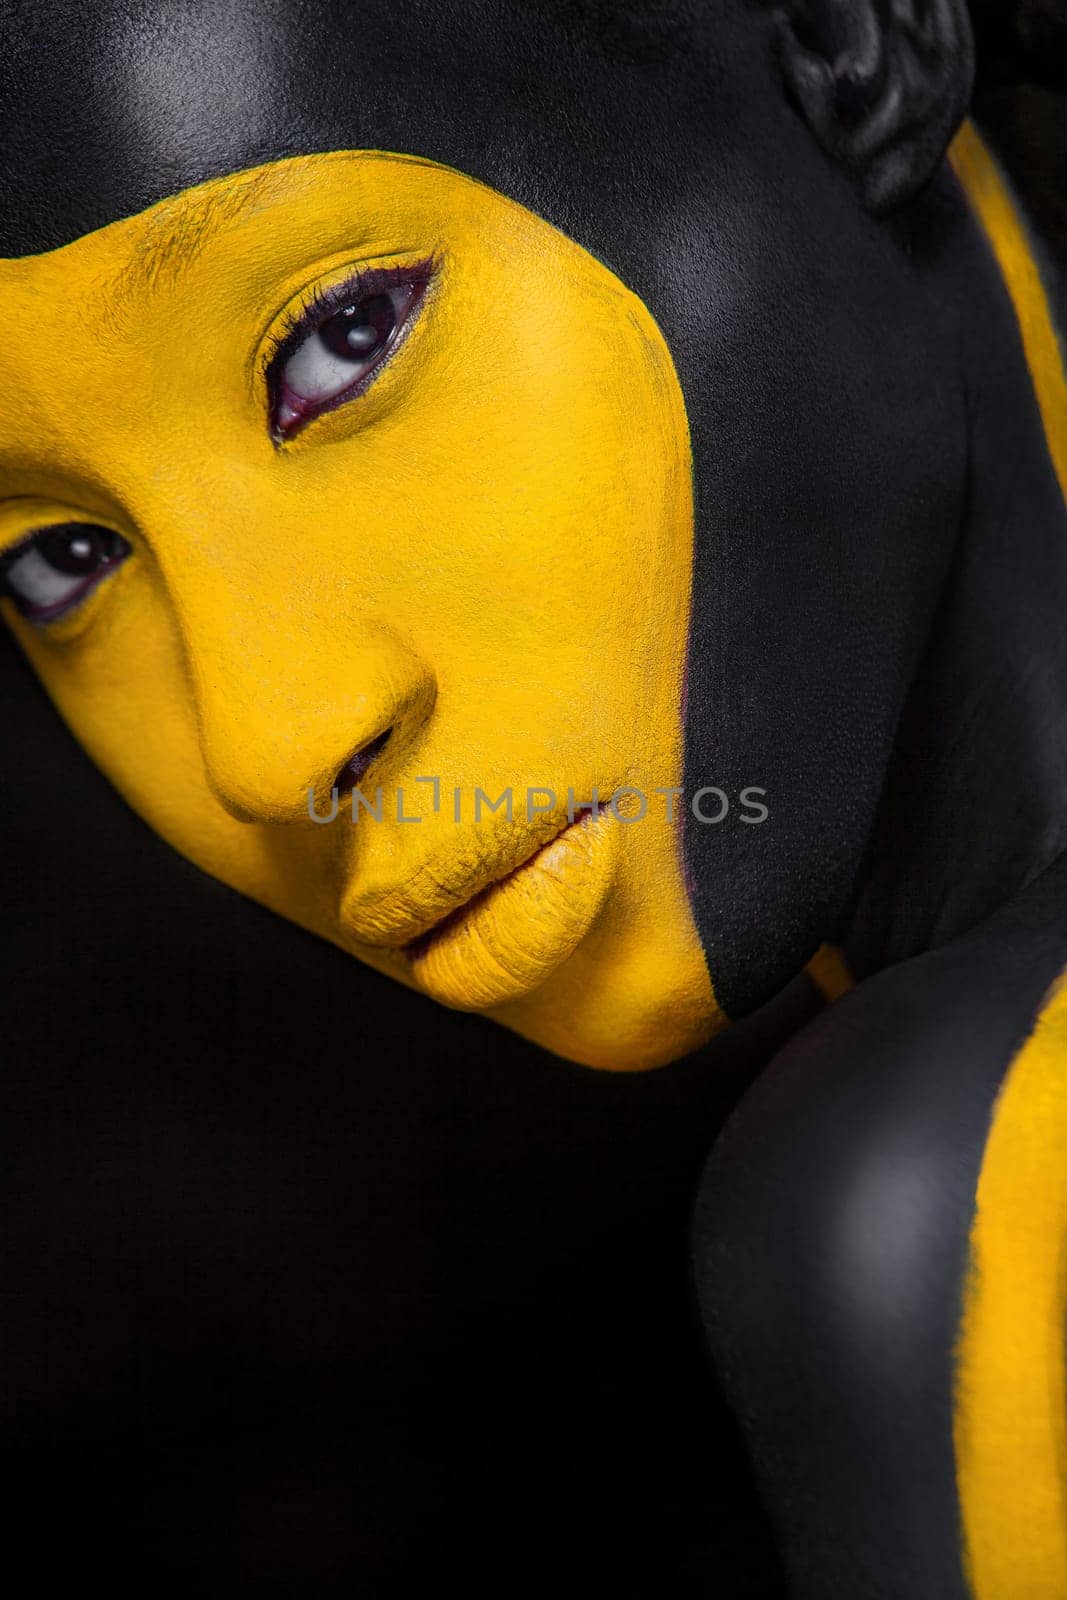 Woman with black body paint. Cheerful young african girl with art bodypaint. An amazing model with yellow makeup. Closeup face.